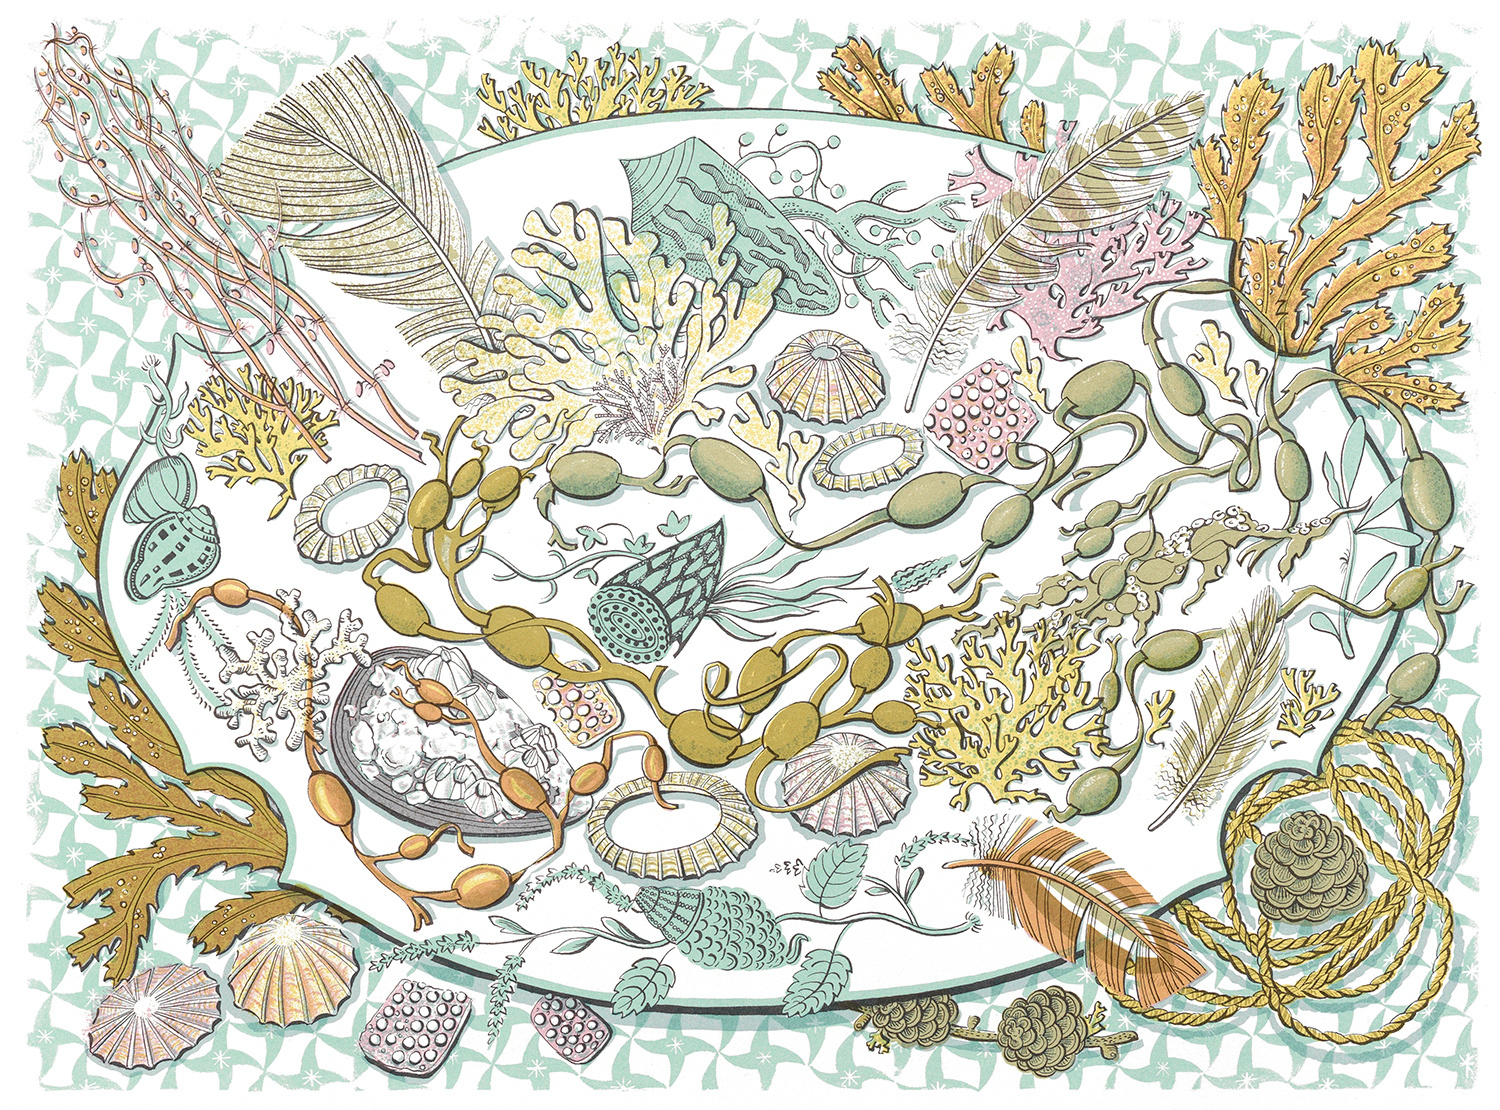 Shell, Seaweed & Feather by Angie Lewin